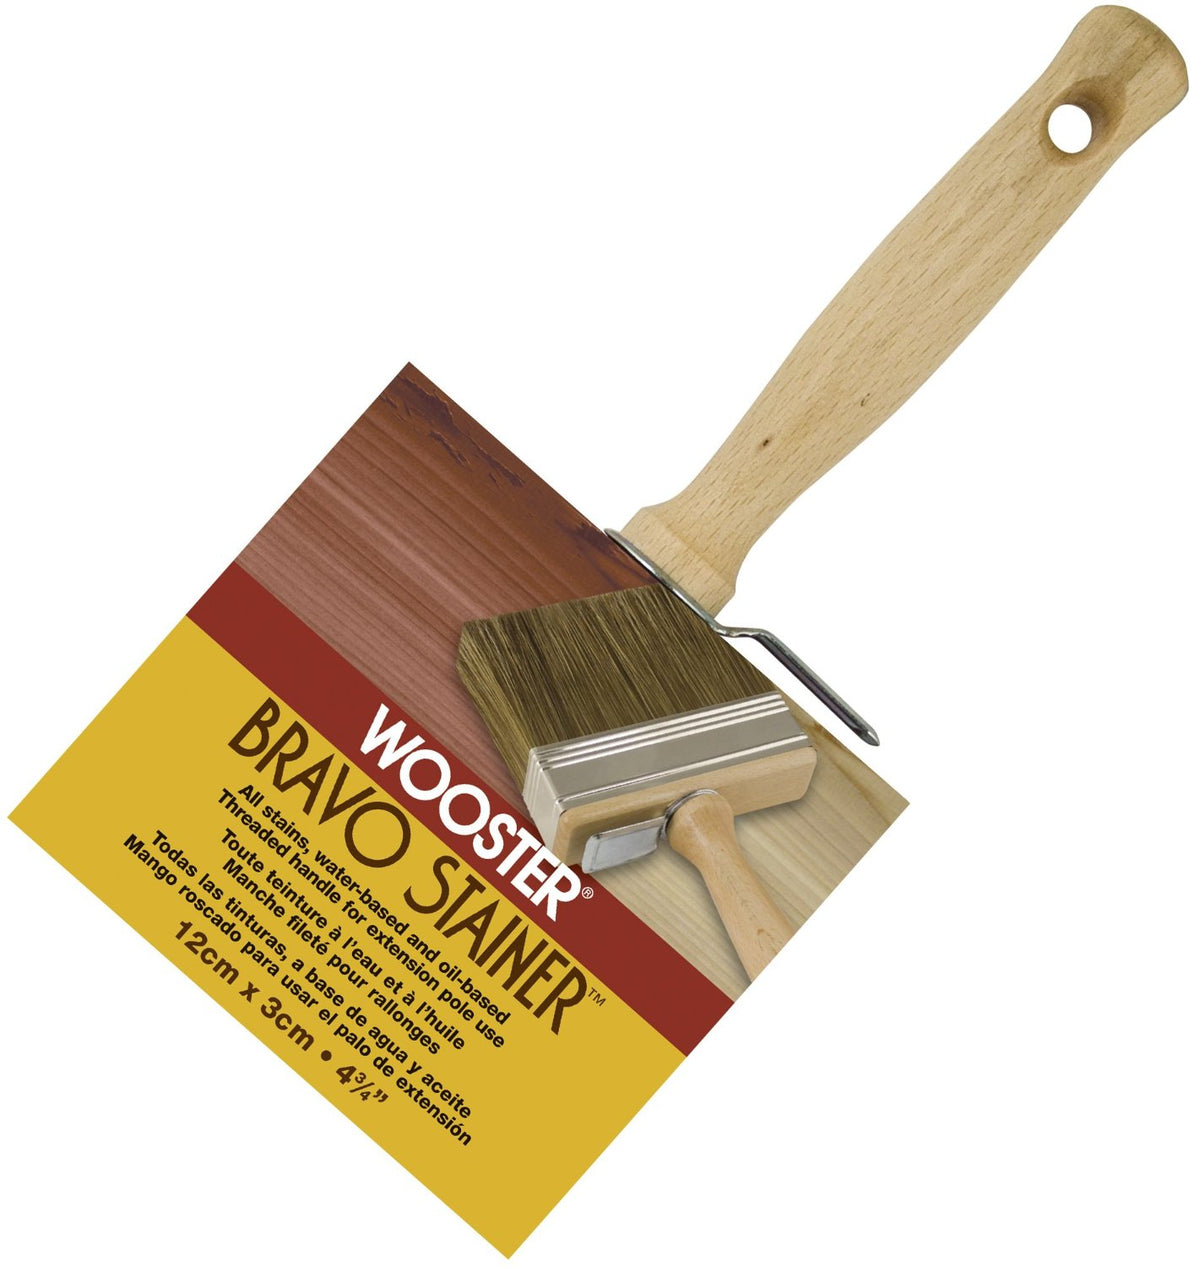 Wooster F5119-4 3/4 Bravo Stainer Polyester/Bristle Stain Brush, 4-3/4"